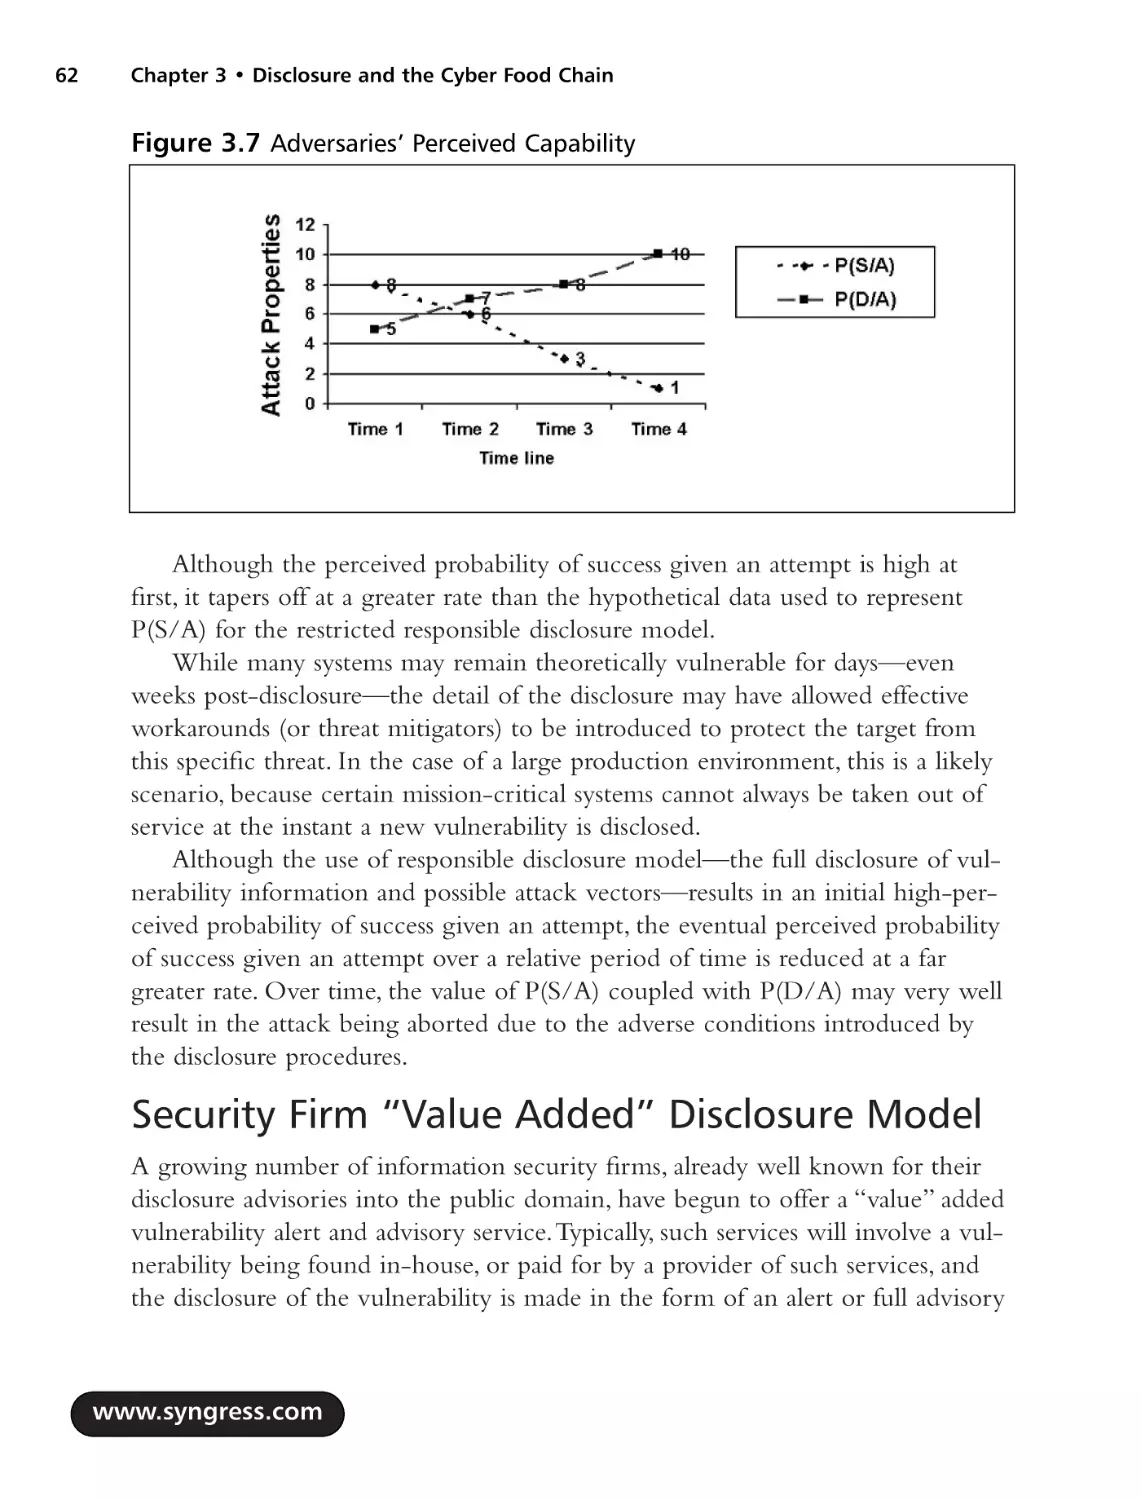 Security Firm "Value Added" Disclosure Model